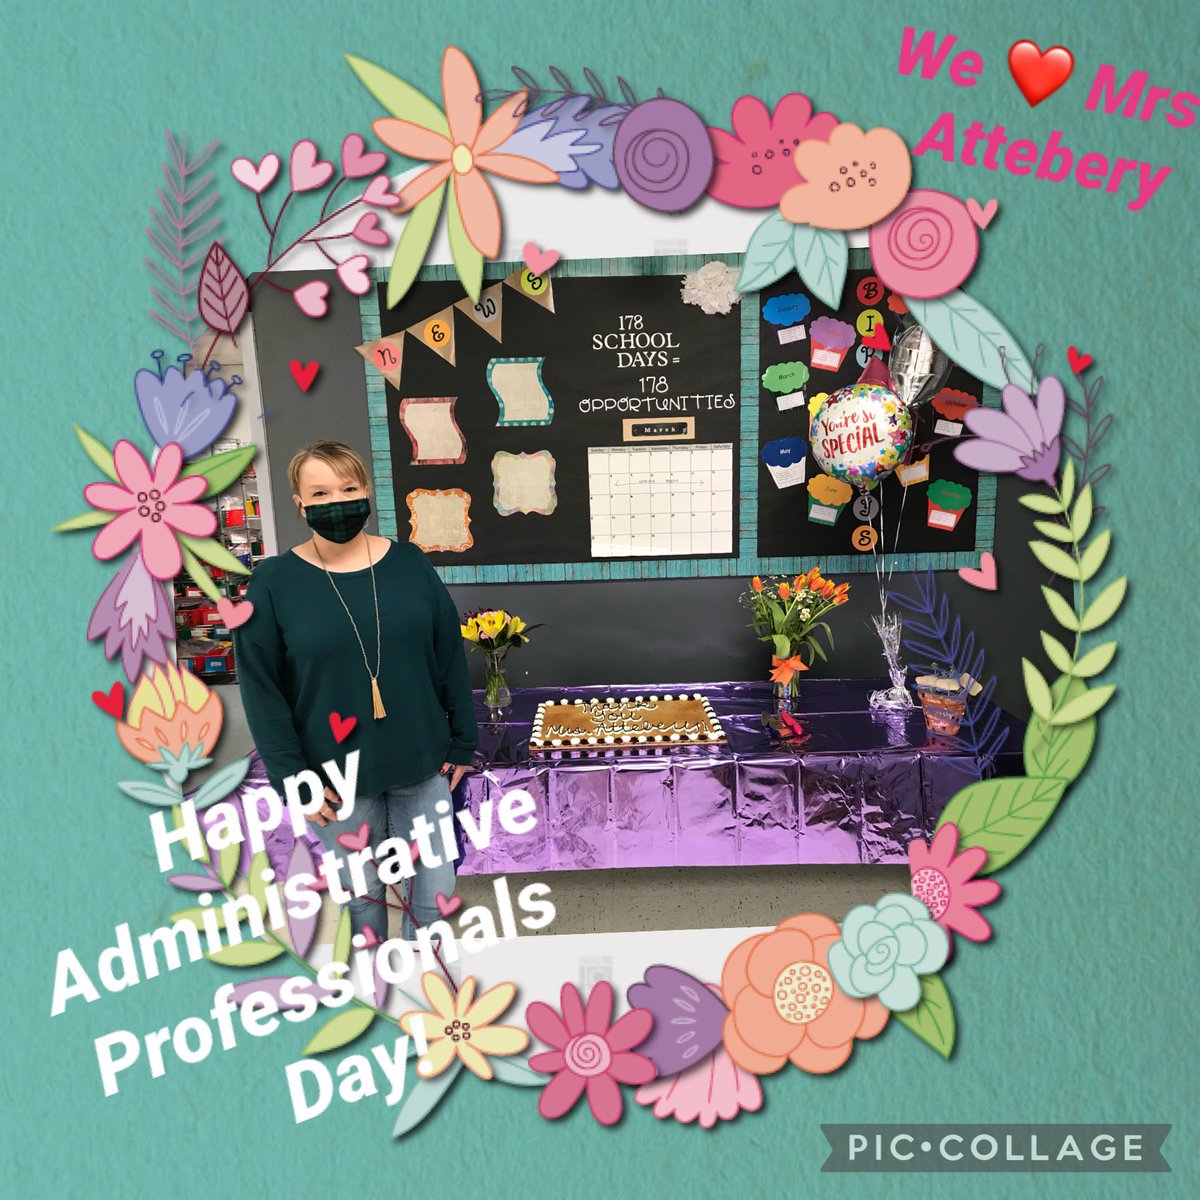 We are so thankful for all Mrs. Attebery does for us. She is the glue that holds us together. #AdministrativeProfessionalsDay #LISDFutureFocus